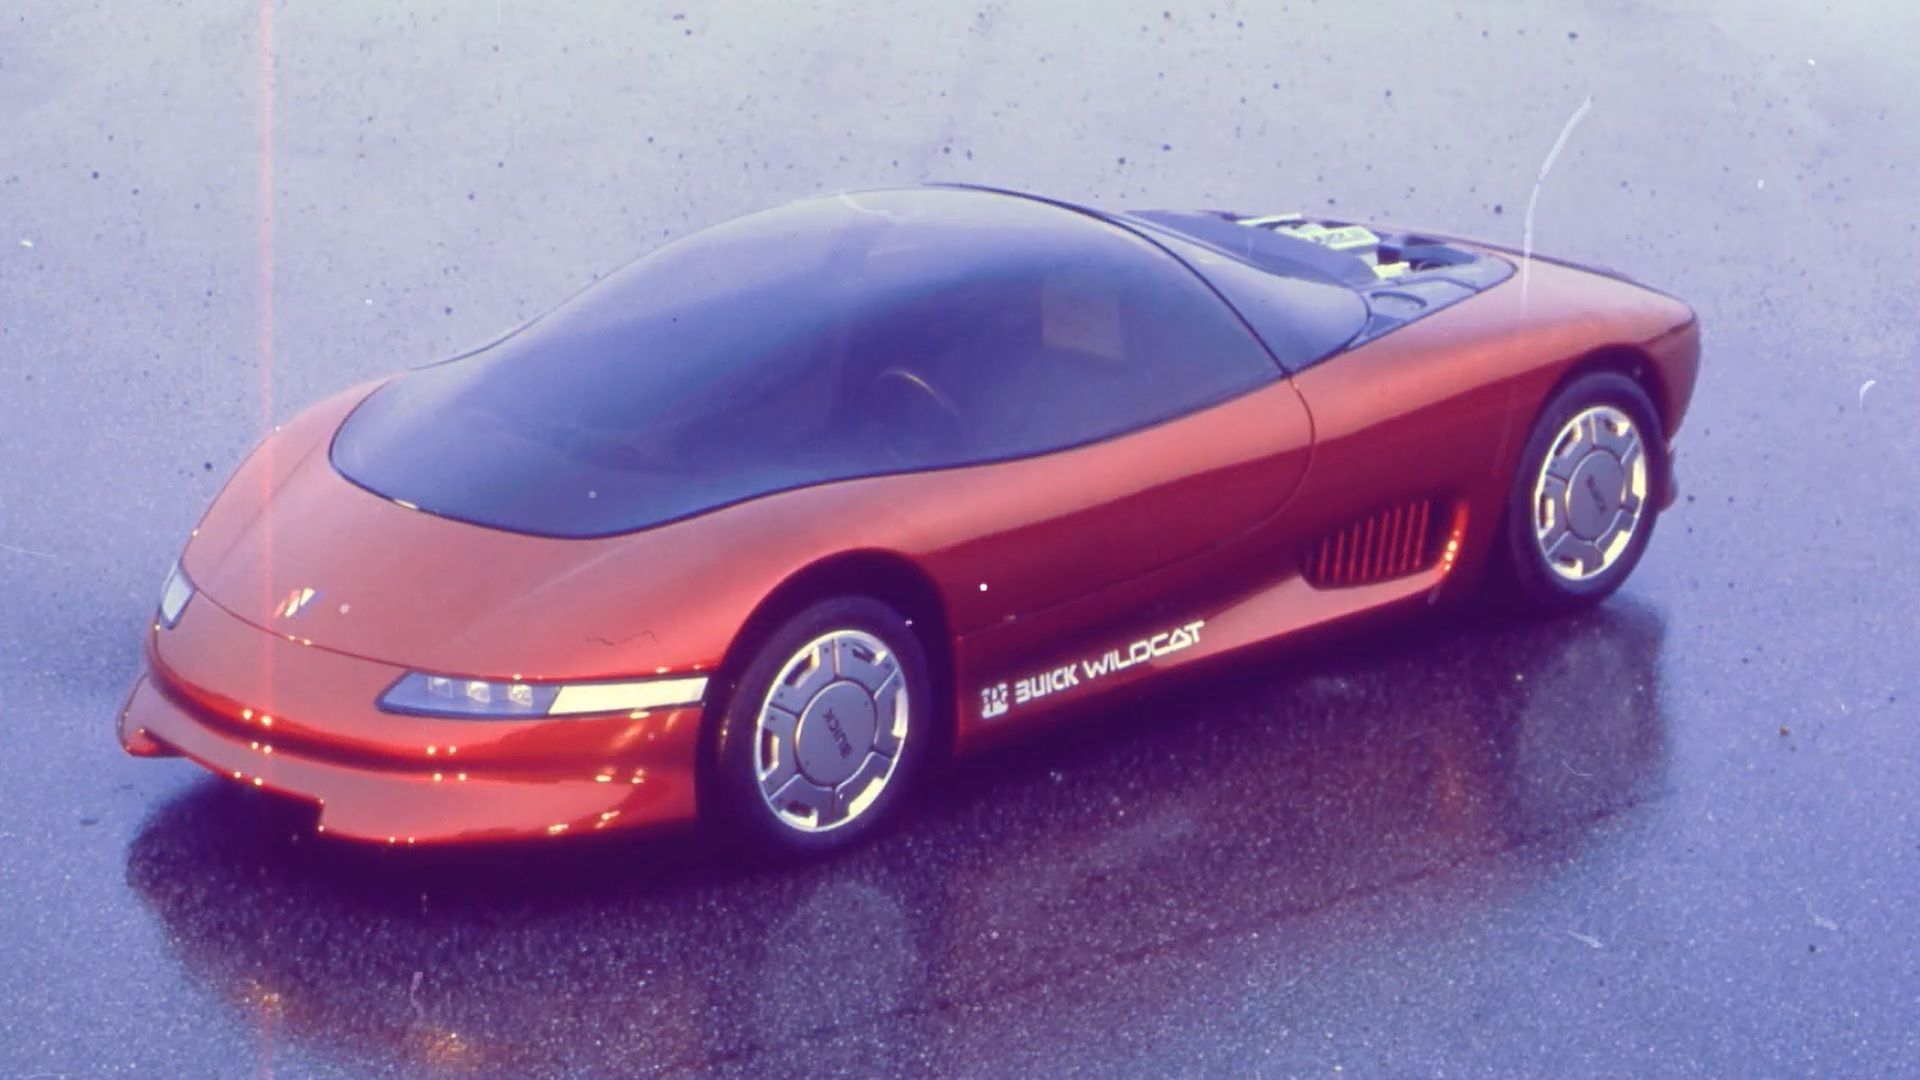 1985 Buick Wildcat Concept - The Car You've Definitely Forgotten About 